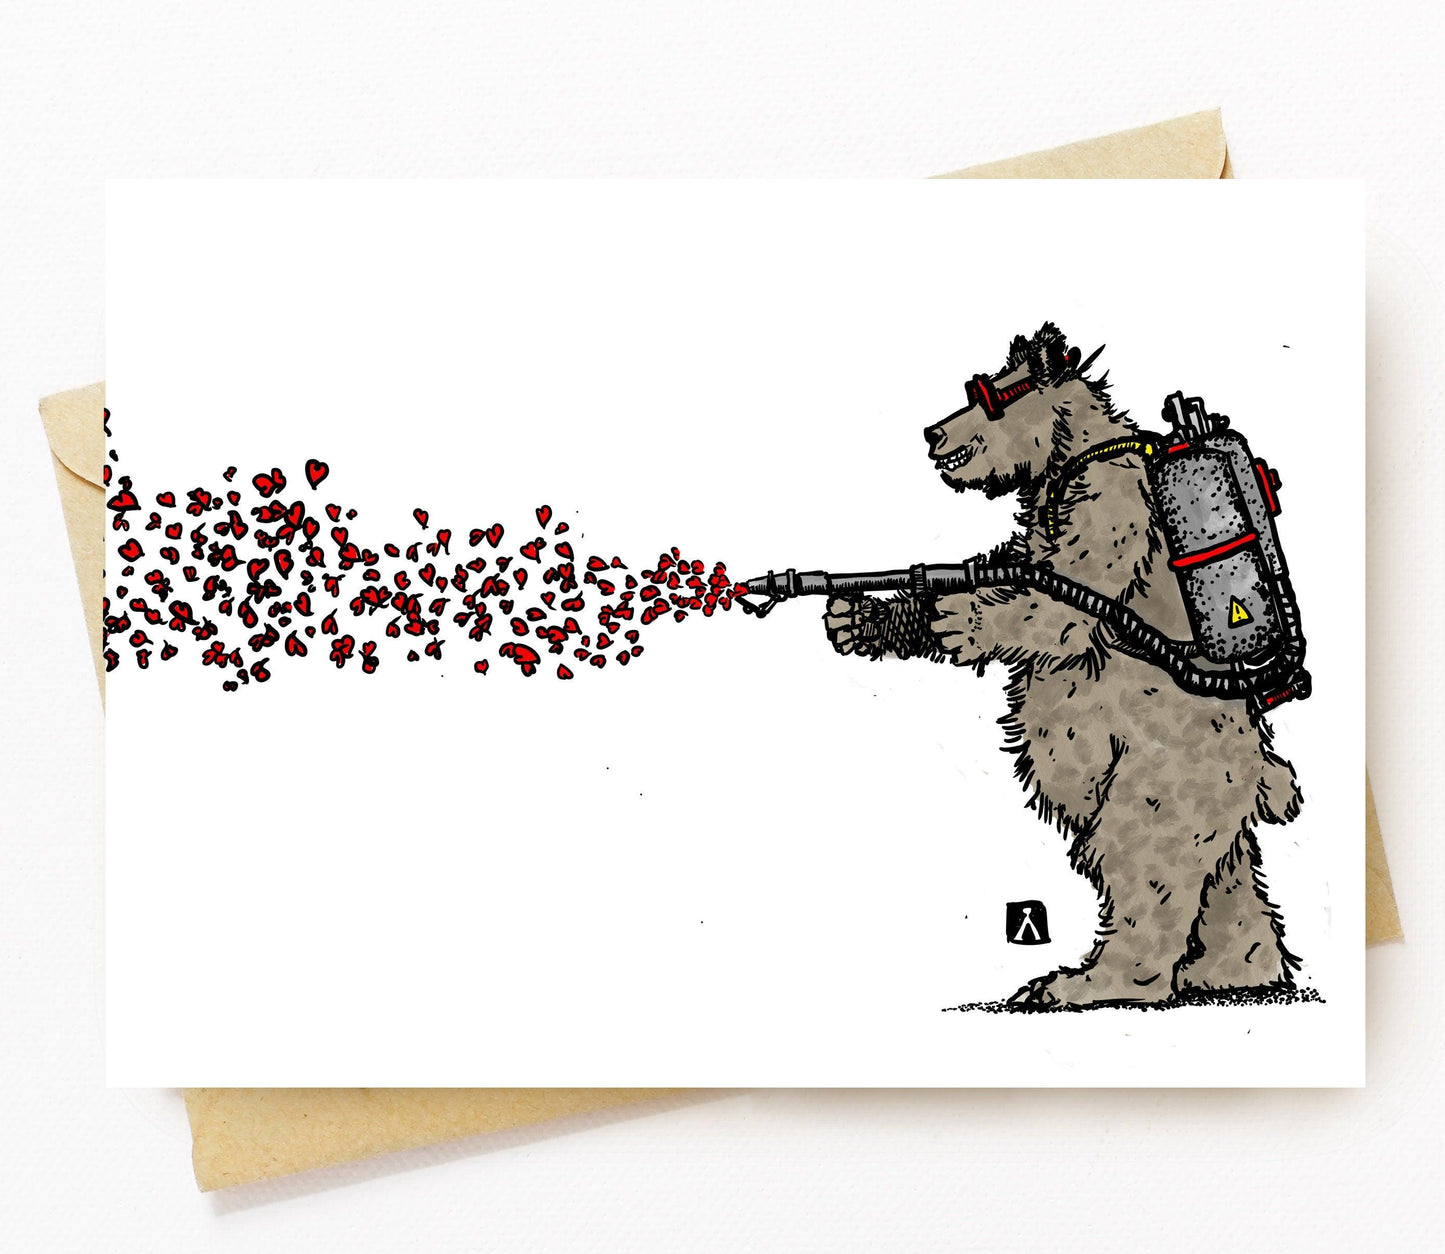 BellavanceInk: Valentines Day Card With A Bear Using A Flame Thrower To Share His Valentines Pen & Ink Illustration 5 x 7 Inches - BellavanceInk